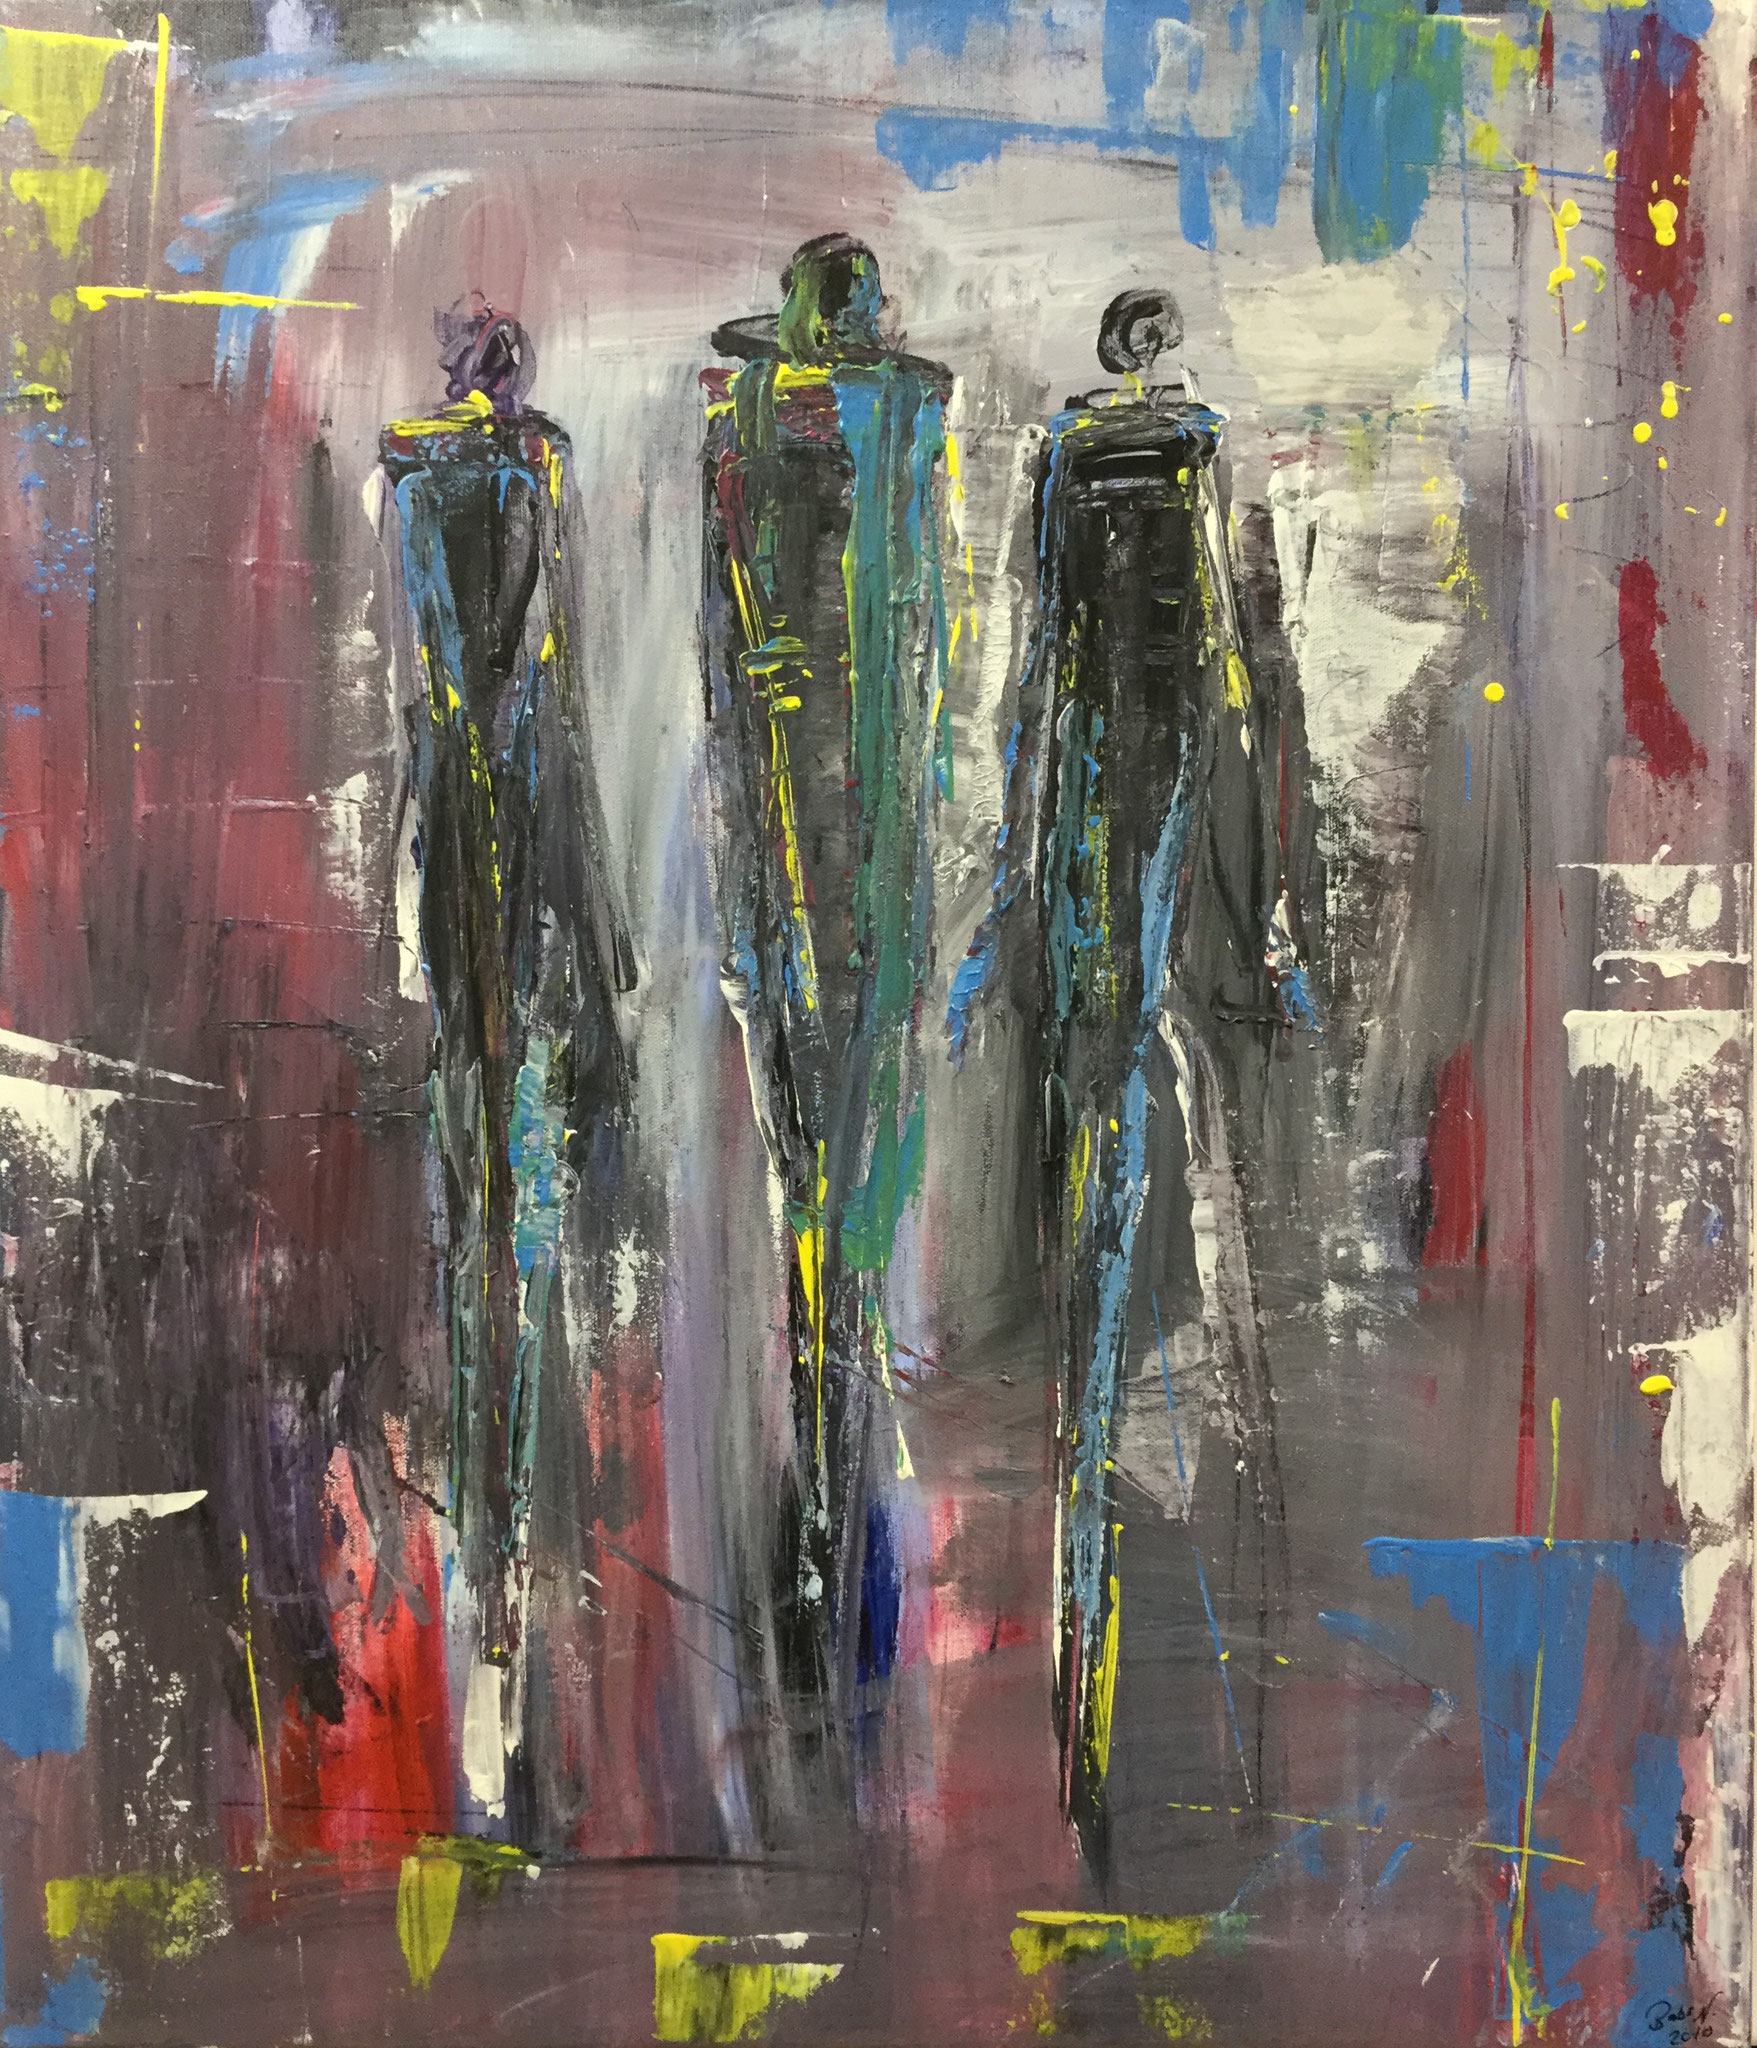 models on stage - 70x60 cm - CHF 650.--